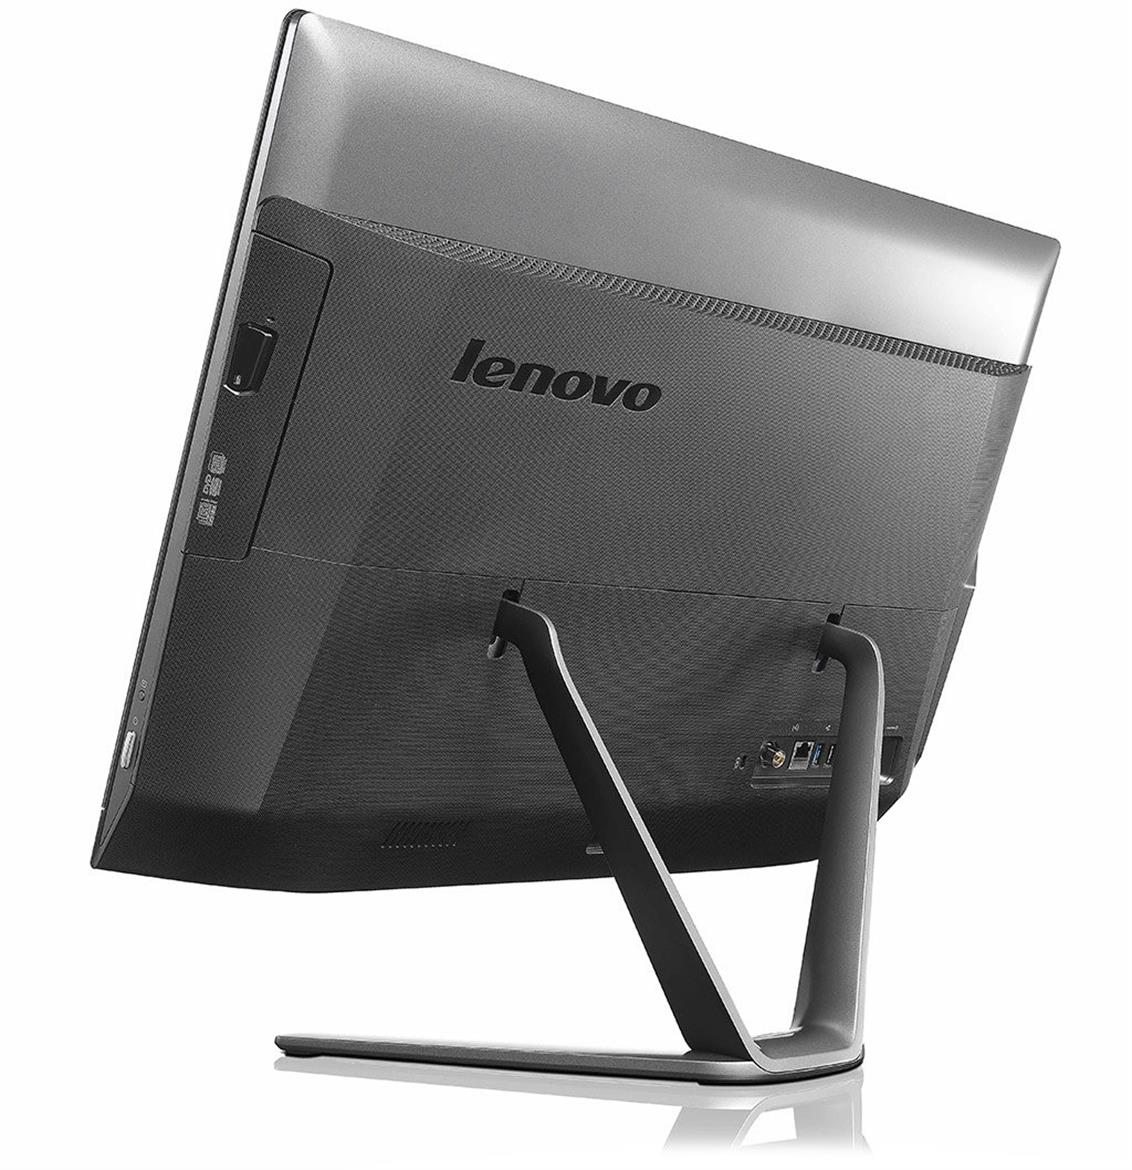 Lenovo B50 All-in-One 23-Inch Multi-Touch Desktop Review